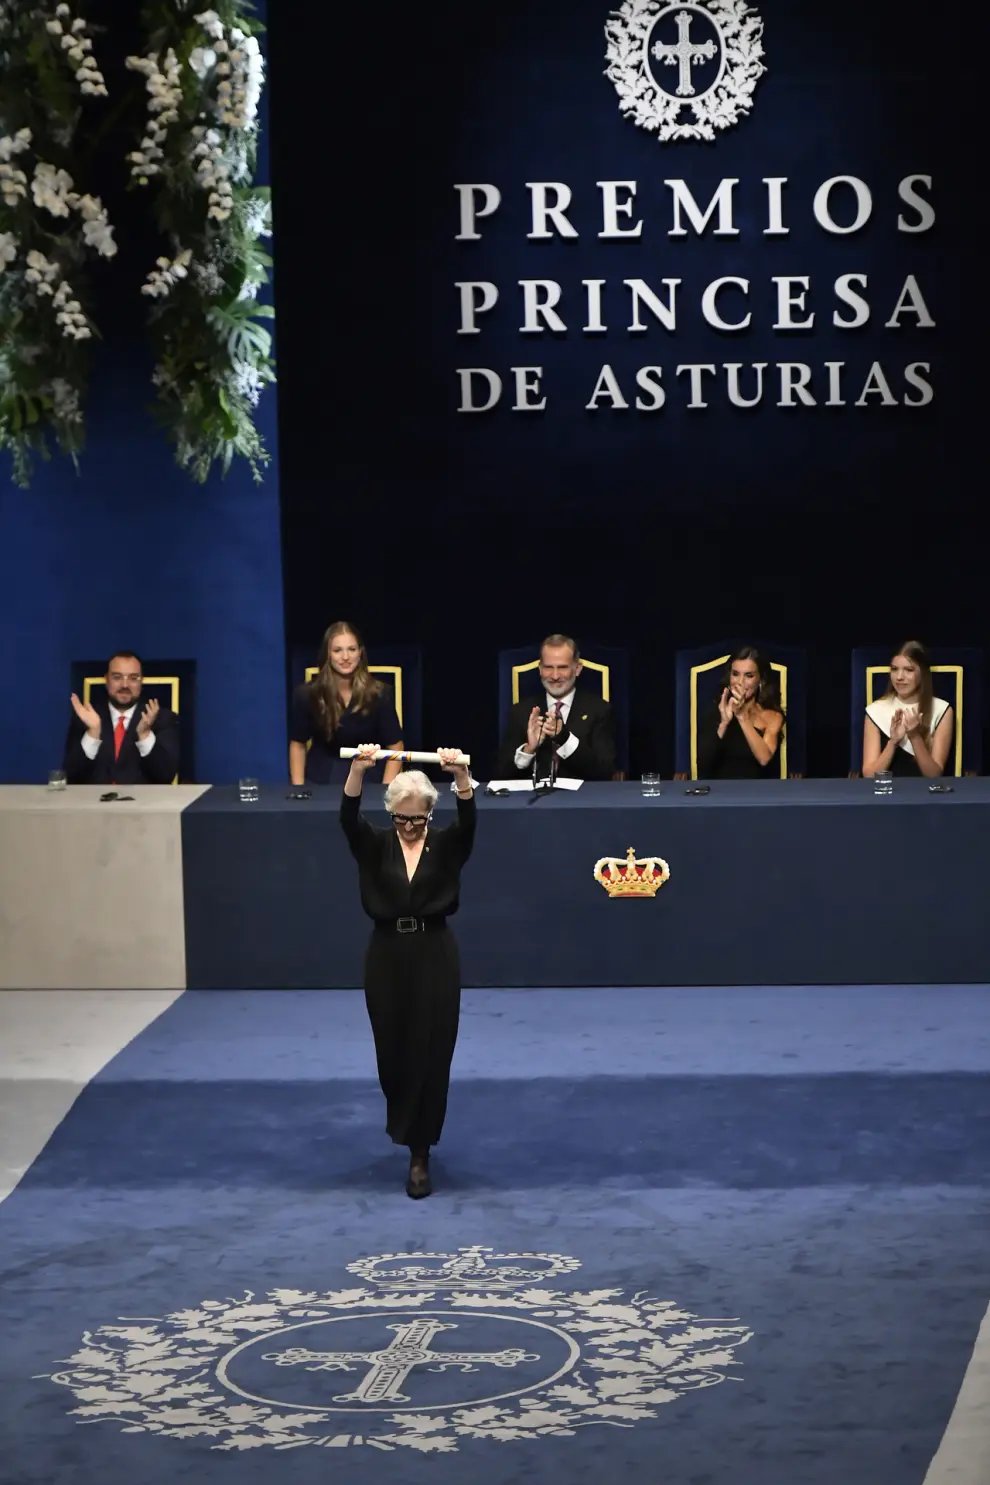 Actress Meryl Streep is applauded by Spanish Royals after being awarded with Prince of Princess of Asturias Award for the Arts during the awards ceremony in Oviedo, northern Spain, Friday, Oct. 20, 2023. The awards, named after the heir to the Spanish throne, are among the most important in the Spanish-speaking world. (AP Photo/Alvaro Barrientos)